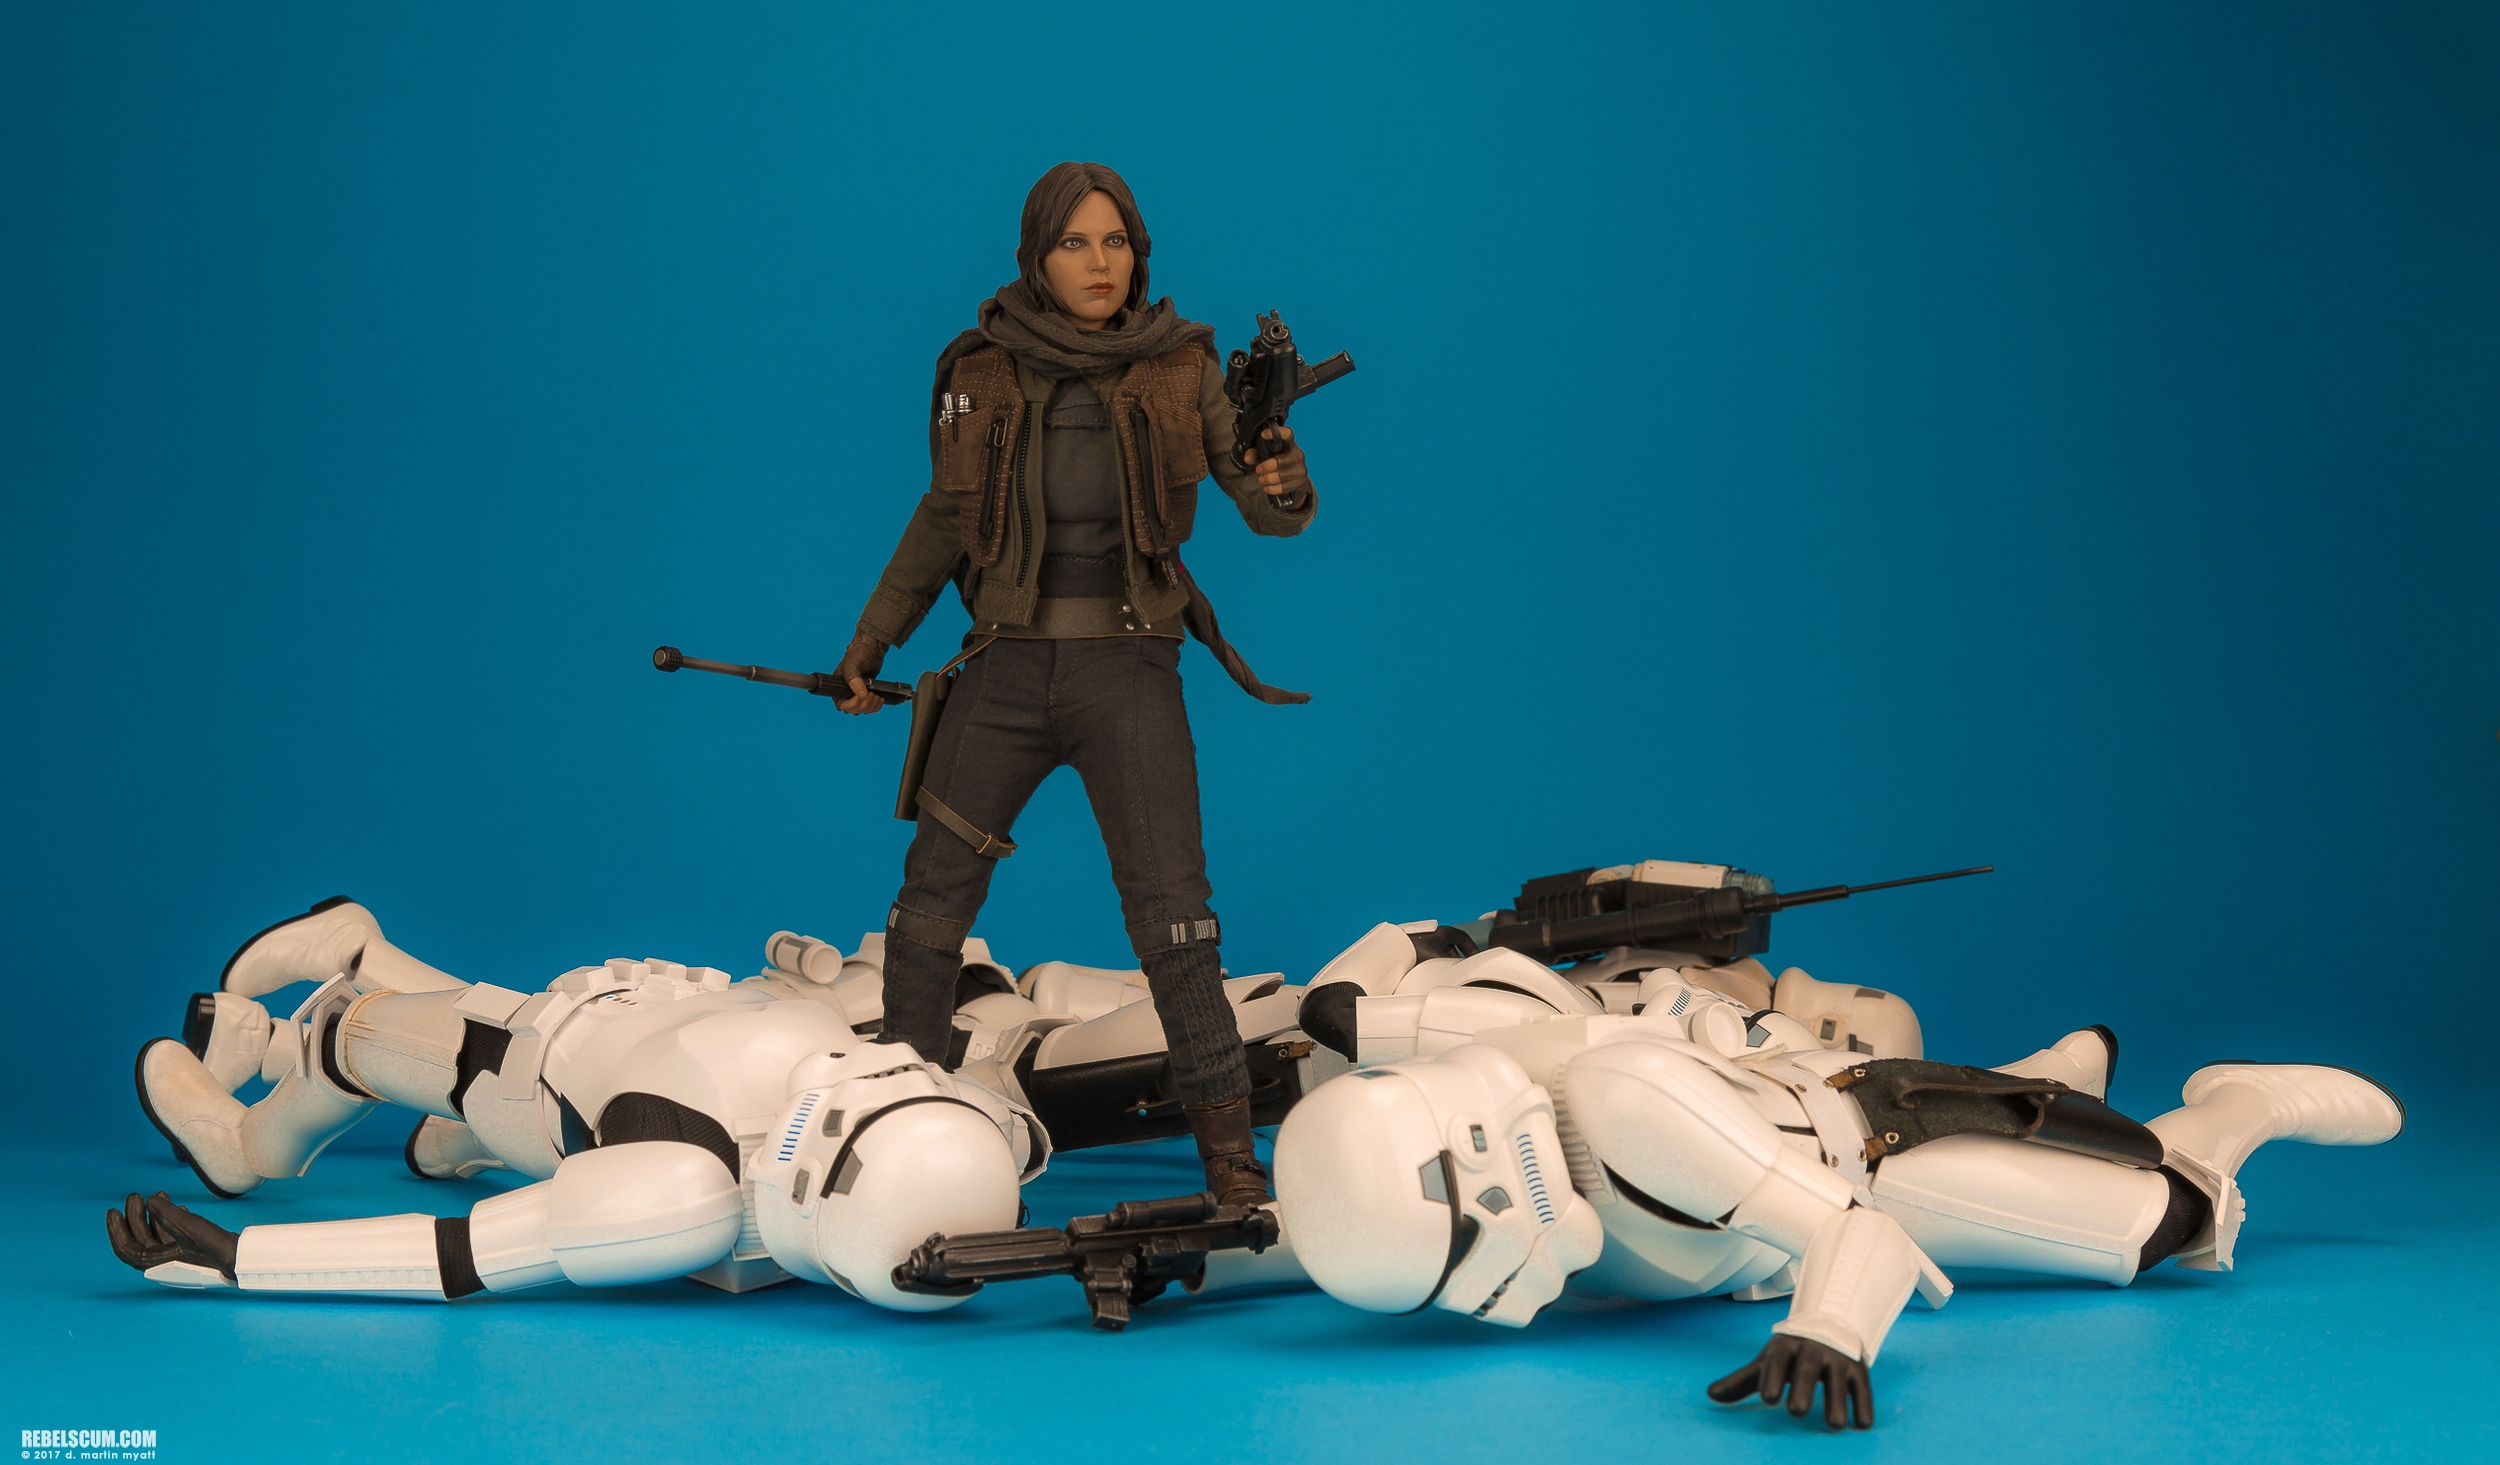 MMS405-Jyn-Erso-Deluxe-Star-Wars-Rogue-One-Hot-Toys-047.jpg